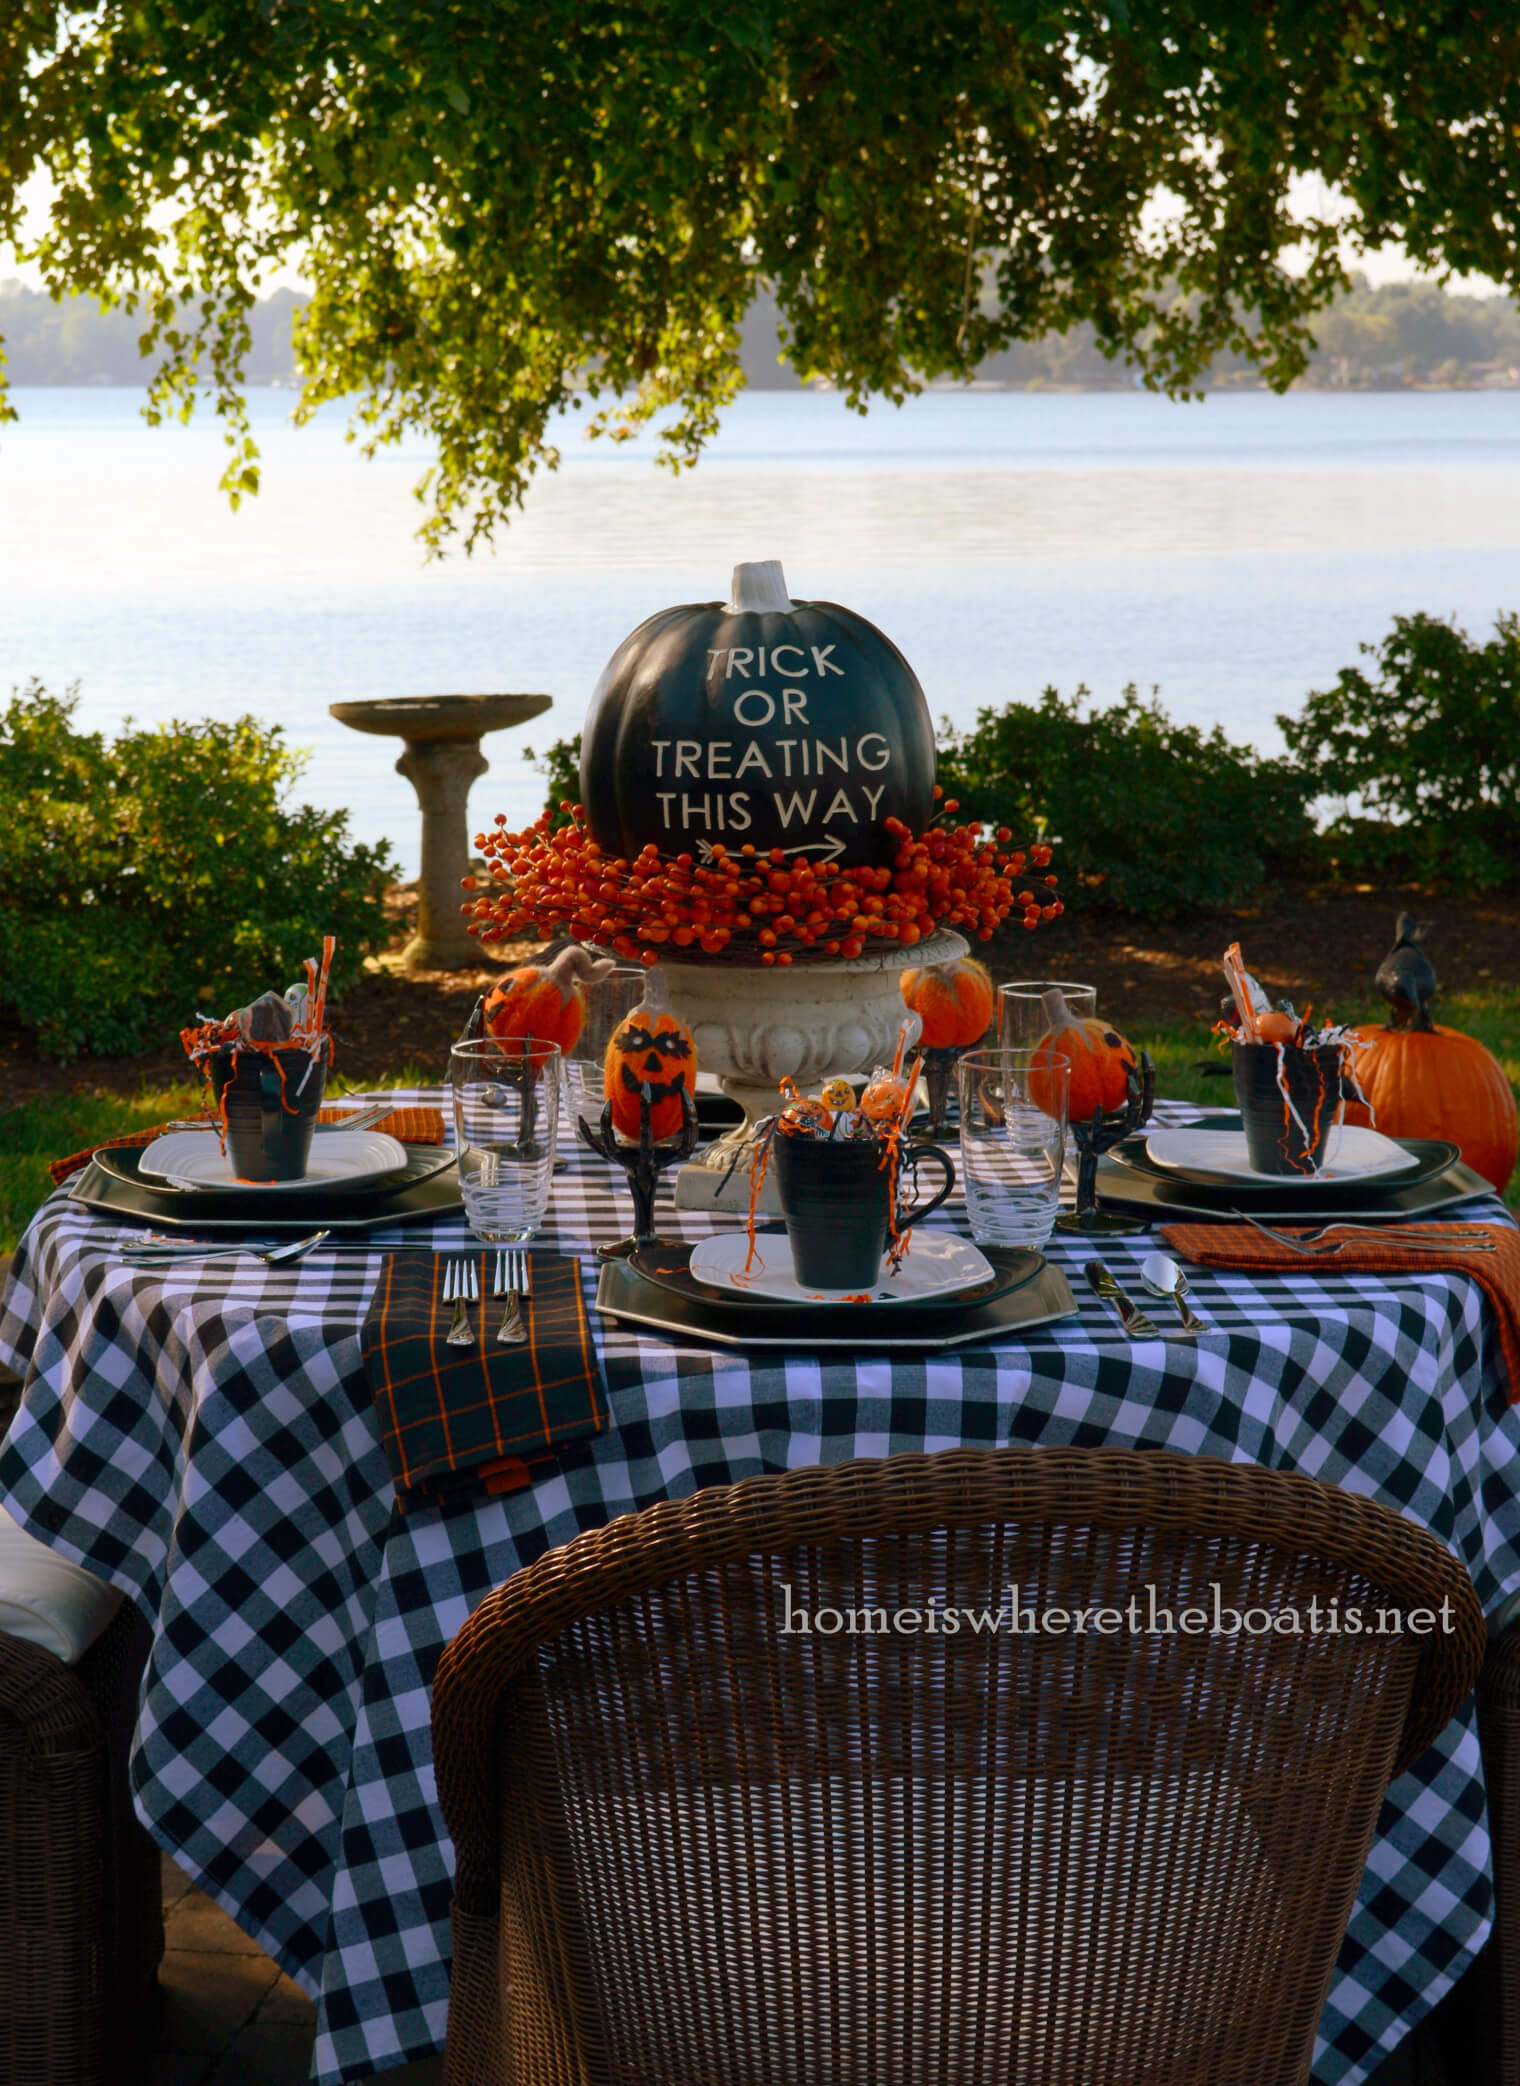 This Way to Trick or Treating | Fun & Spooky Halloween Table Decoration Ideas - FarmFoodFamily.com